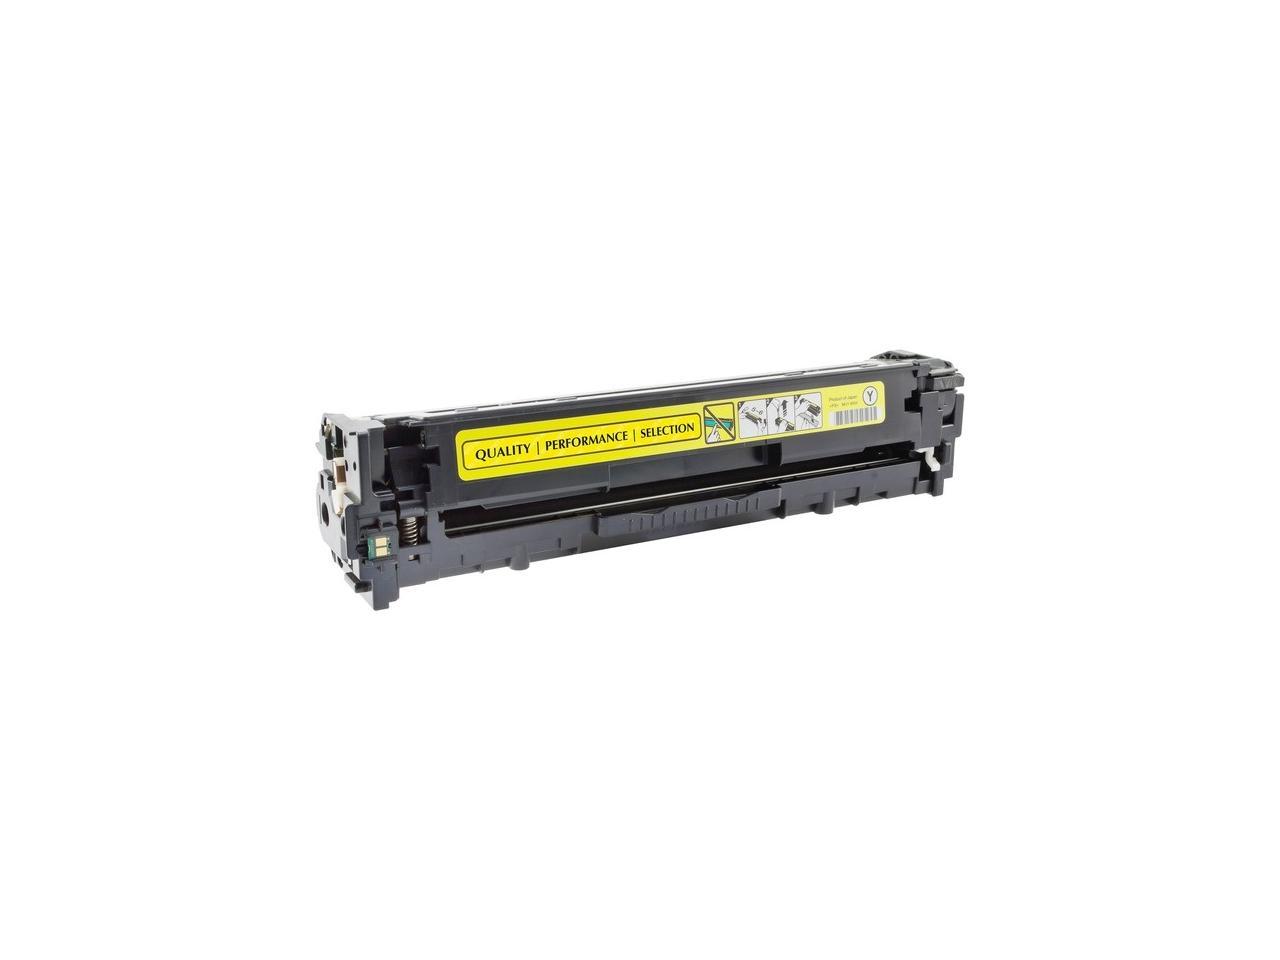 V7 Toner Cartridge - Replacement for HP (CE322A) - Yellow